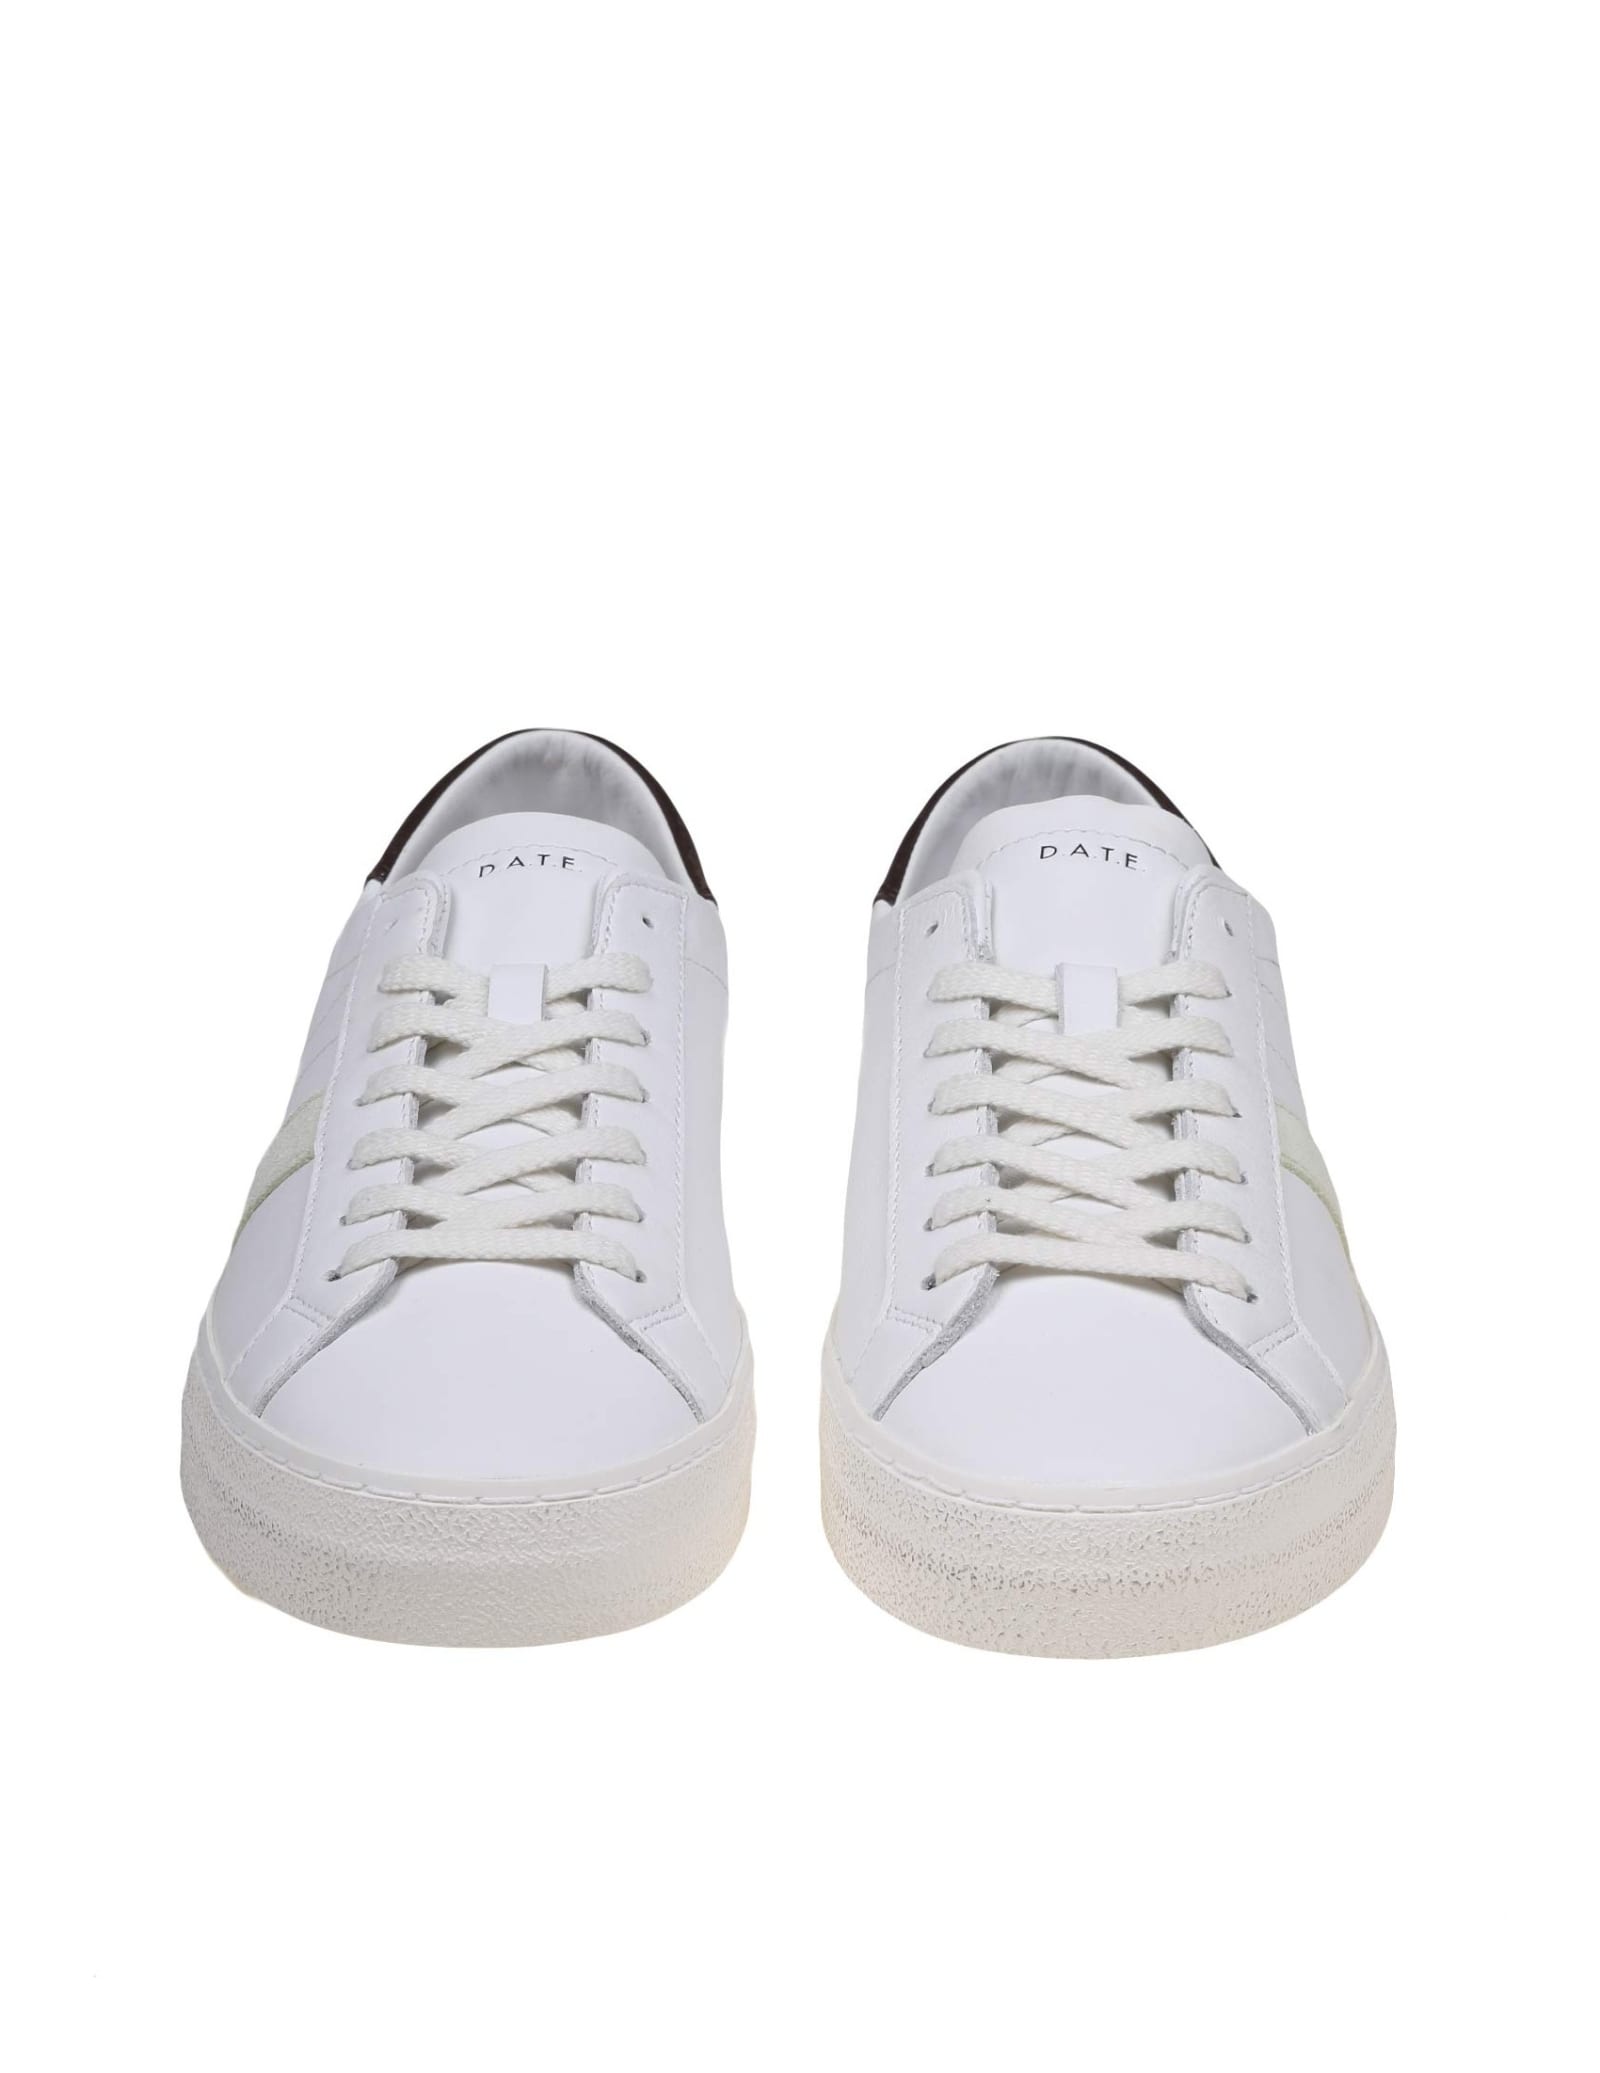 Shop Date Hill Low Vintage Sneakers In White/brown Leather In White/moro